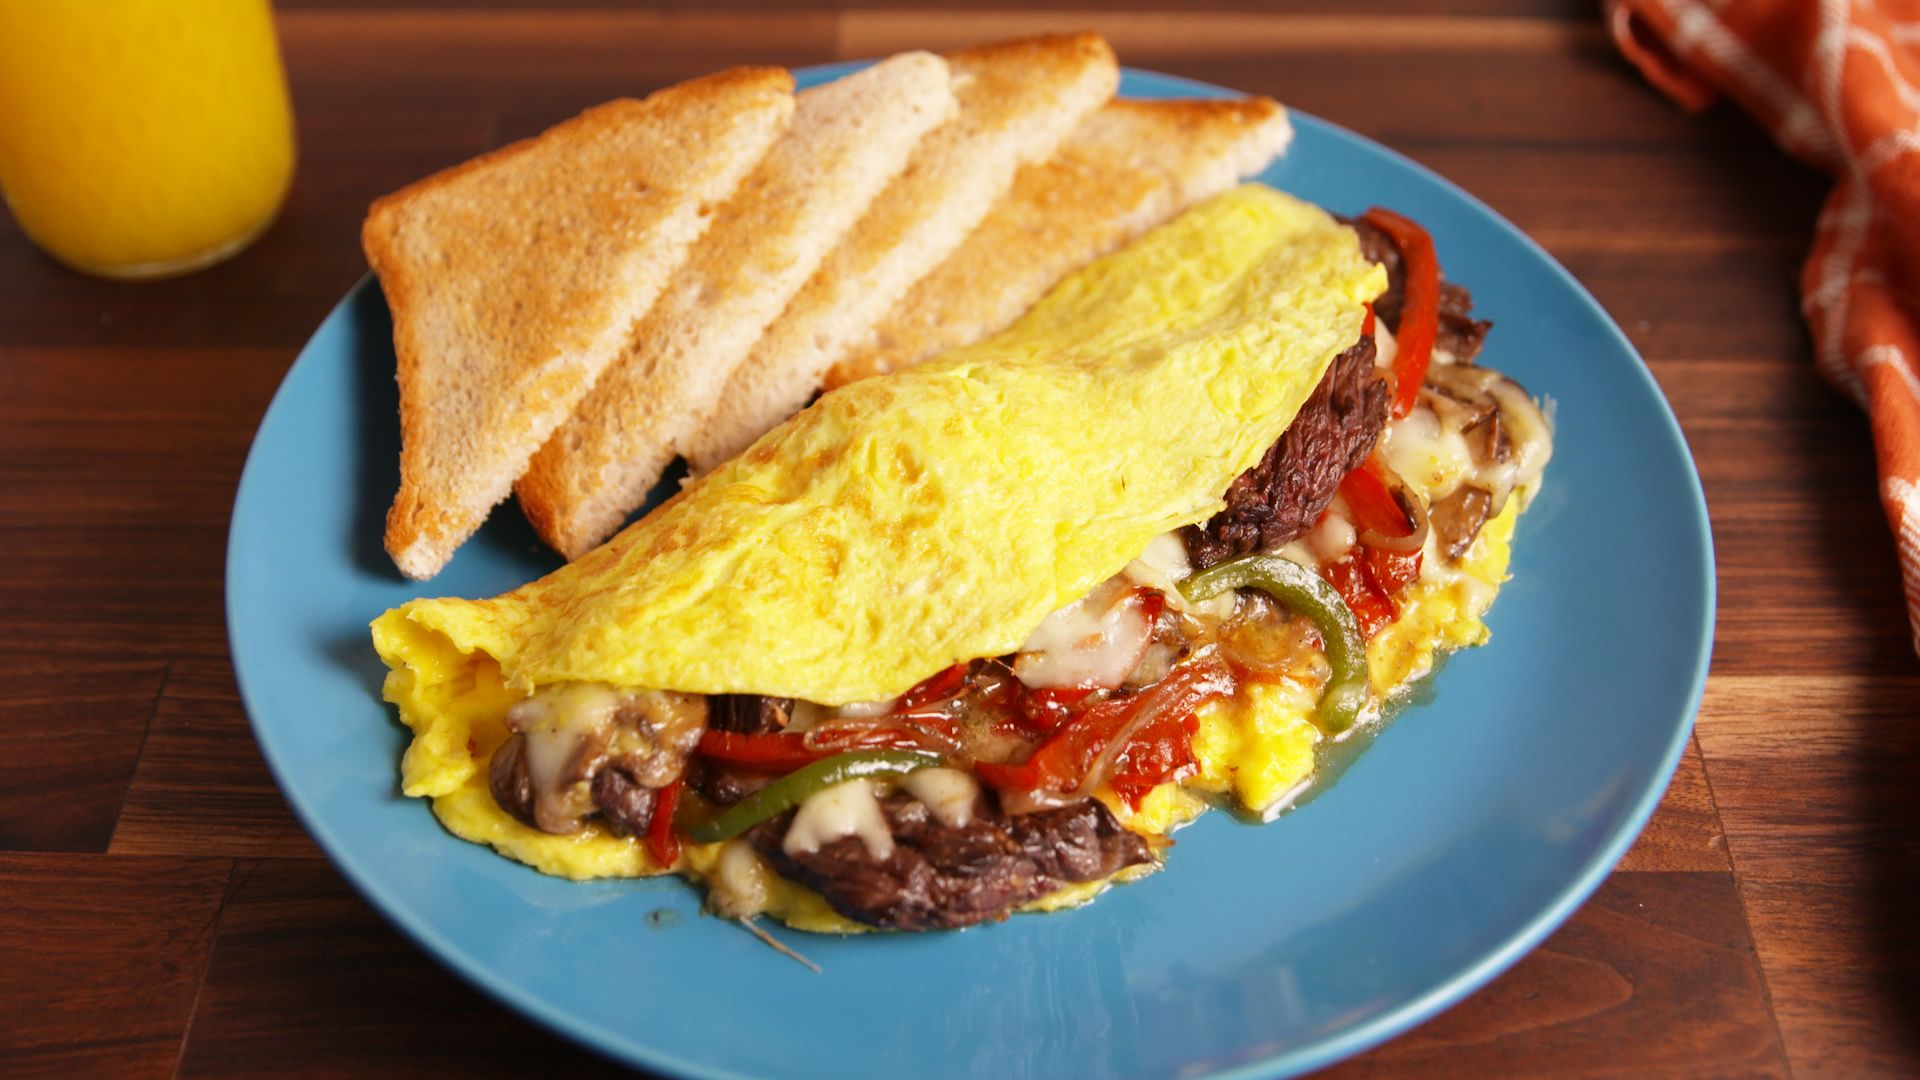 Best Philly Cheesesteak Omelet Recipe How To Make Philly Cheesesteak Omelet,What Is Garam Masala Used For